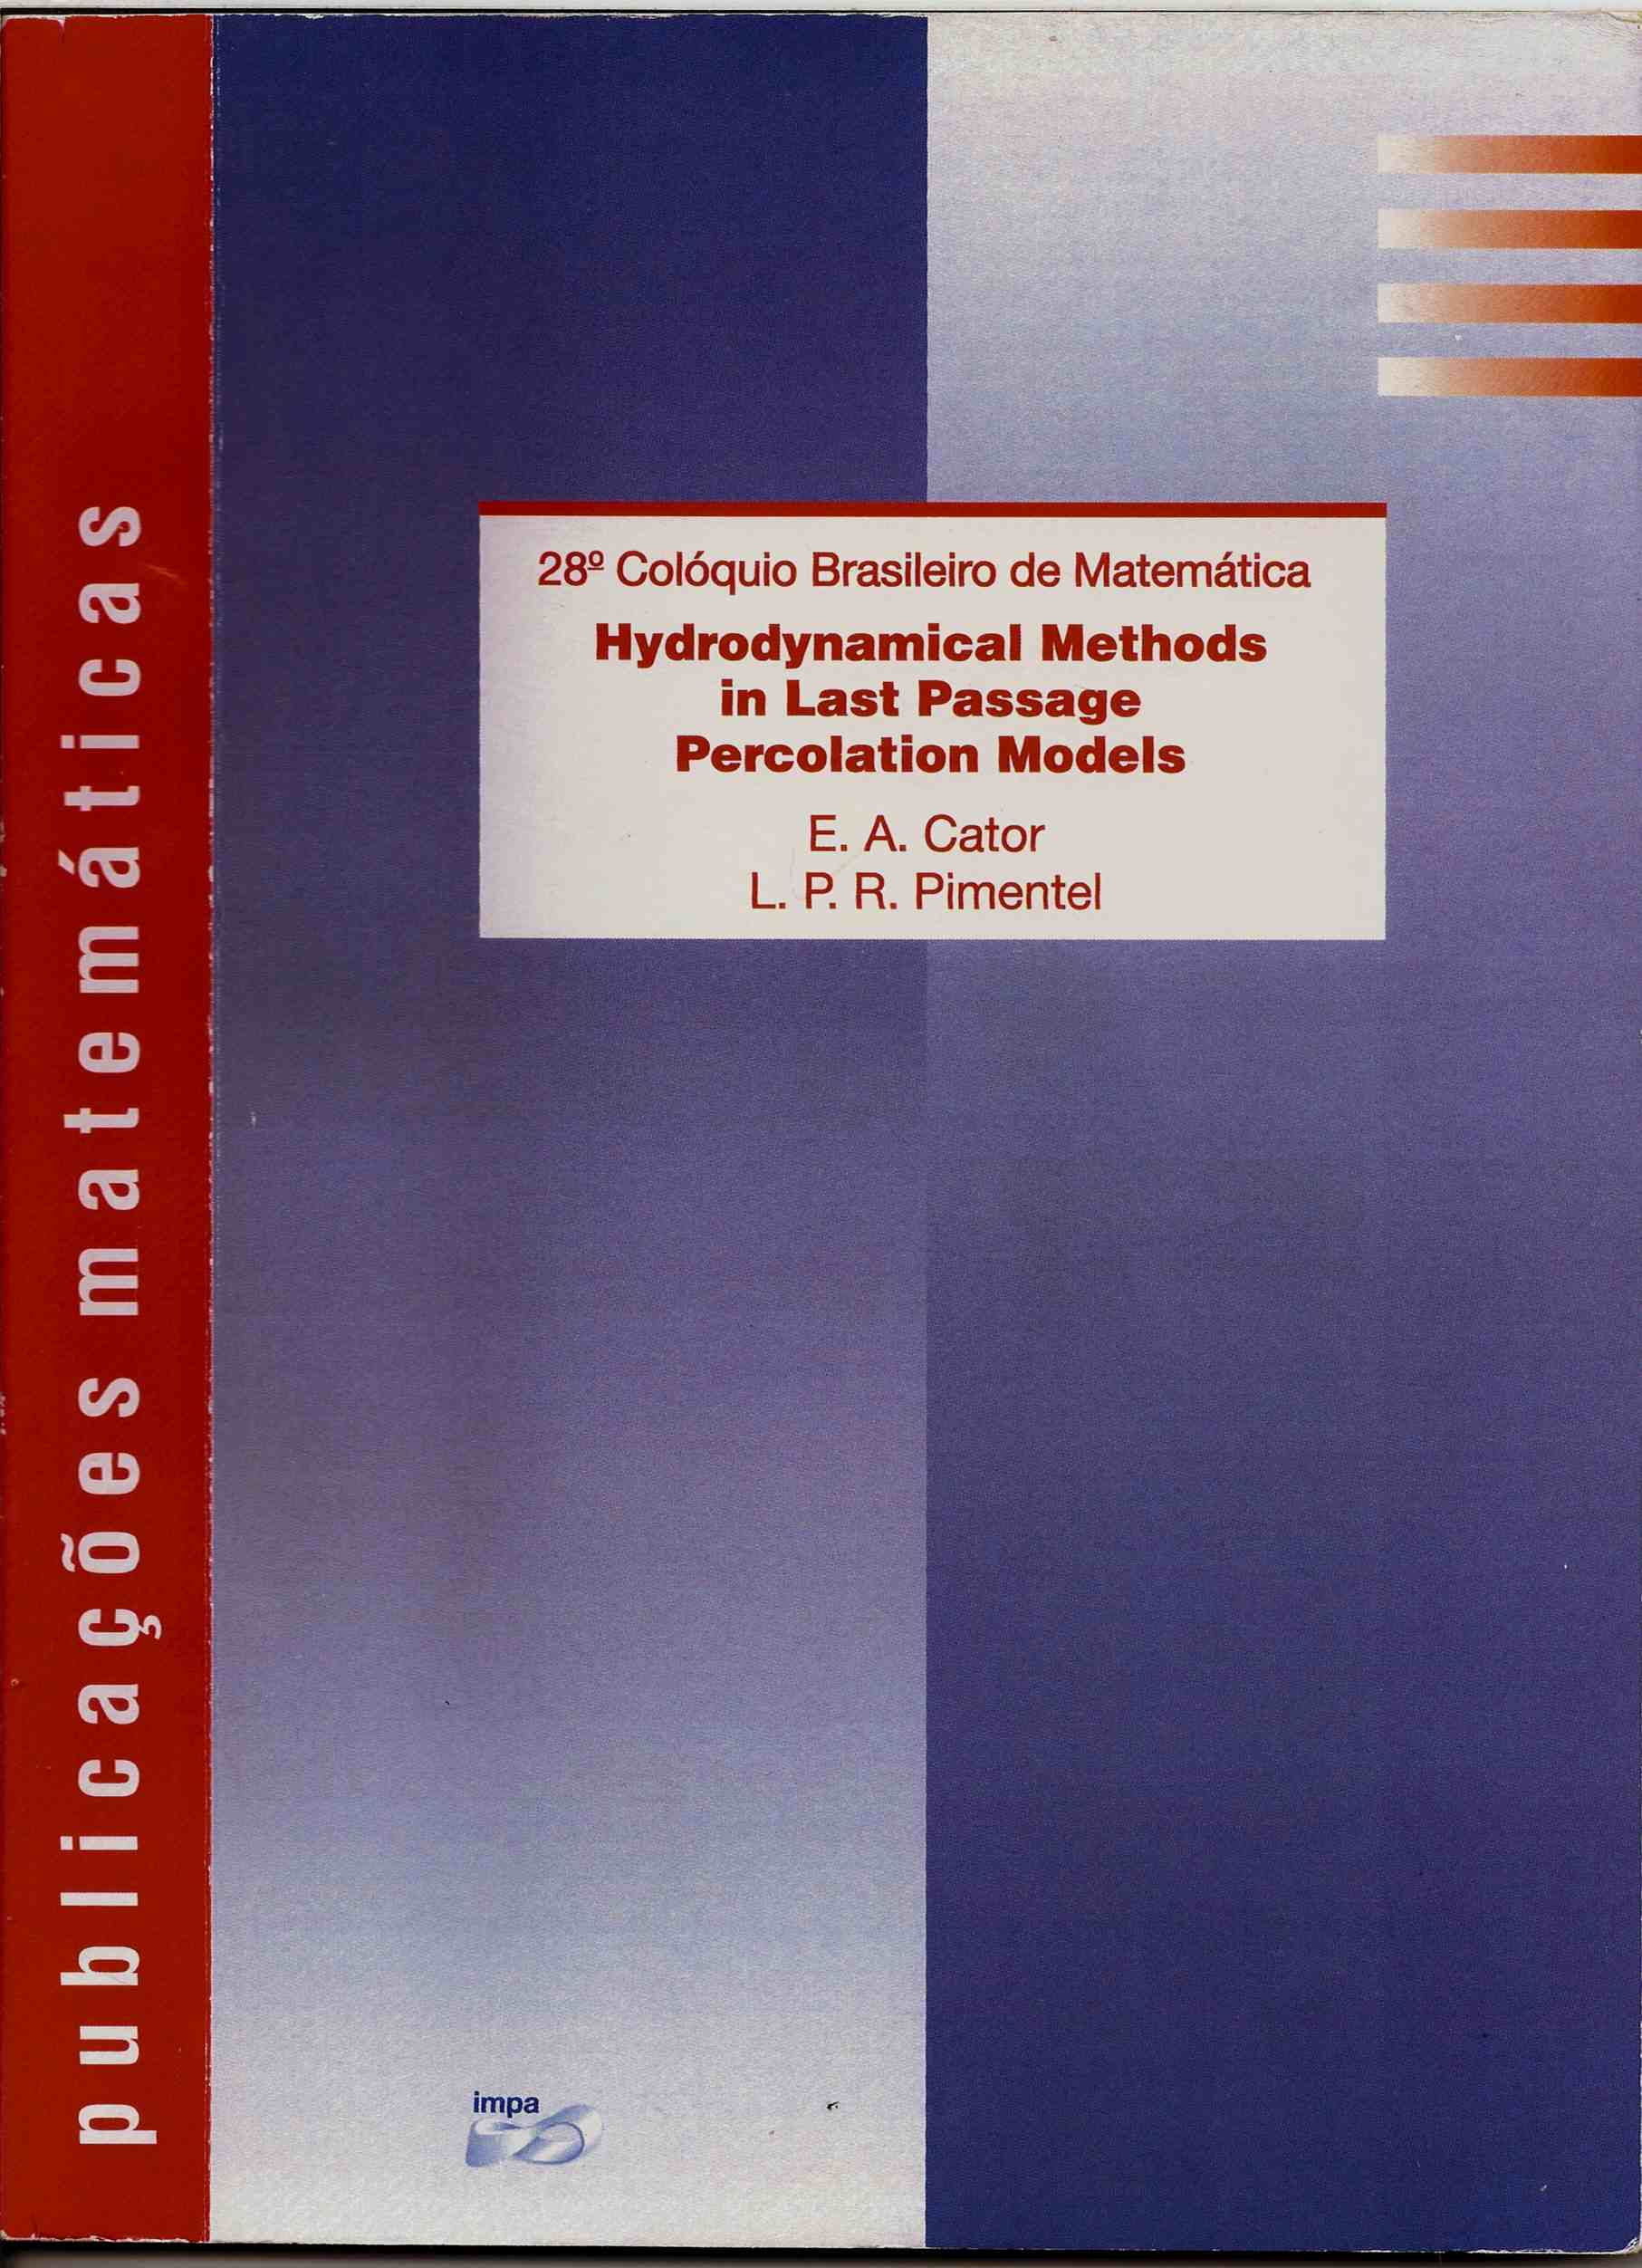 Hydrodynamical Methods in Last Passage Percolation Models